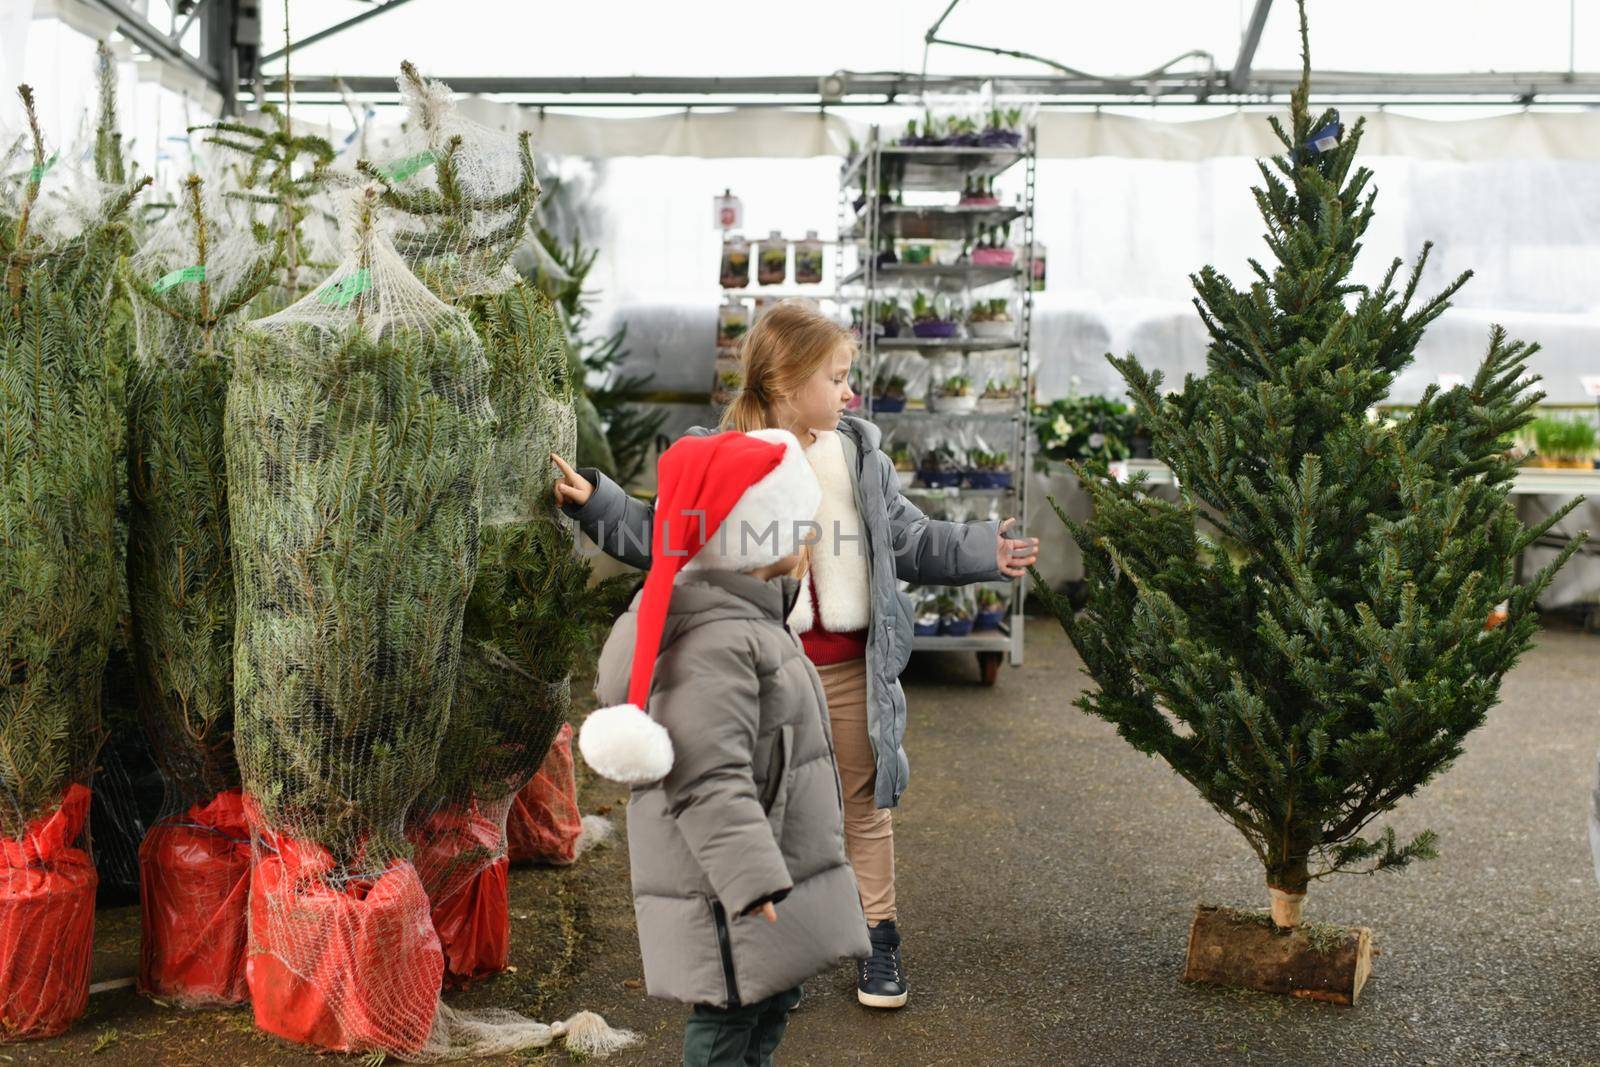 Children choose a Christmas tree at a market.